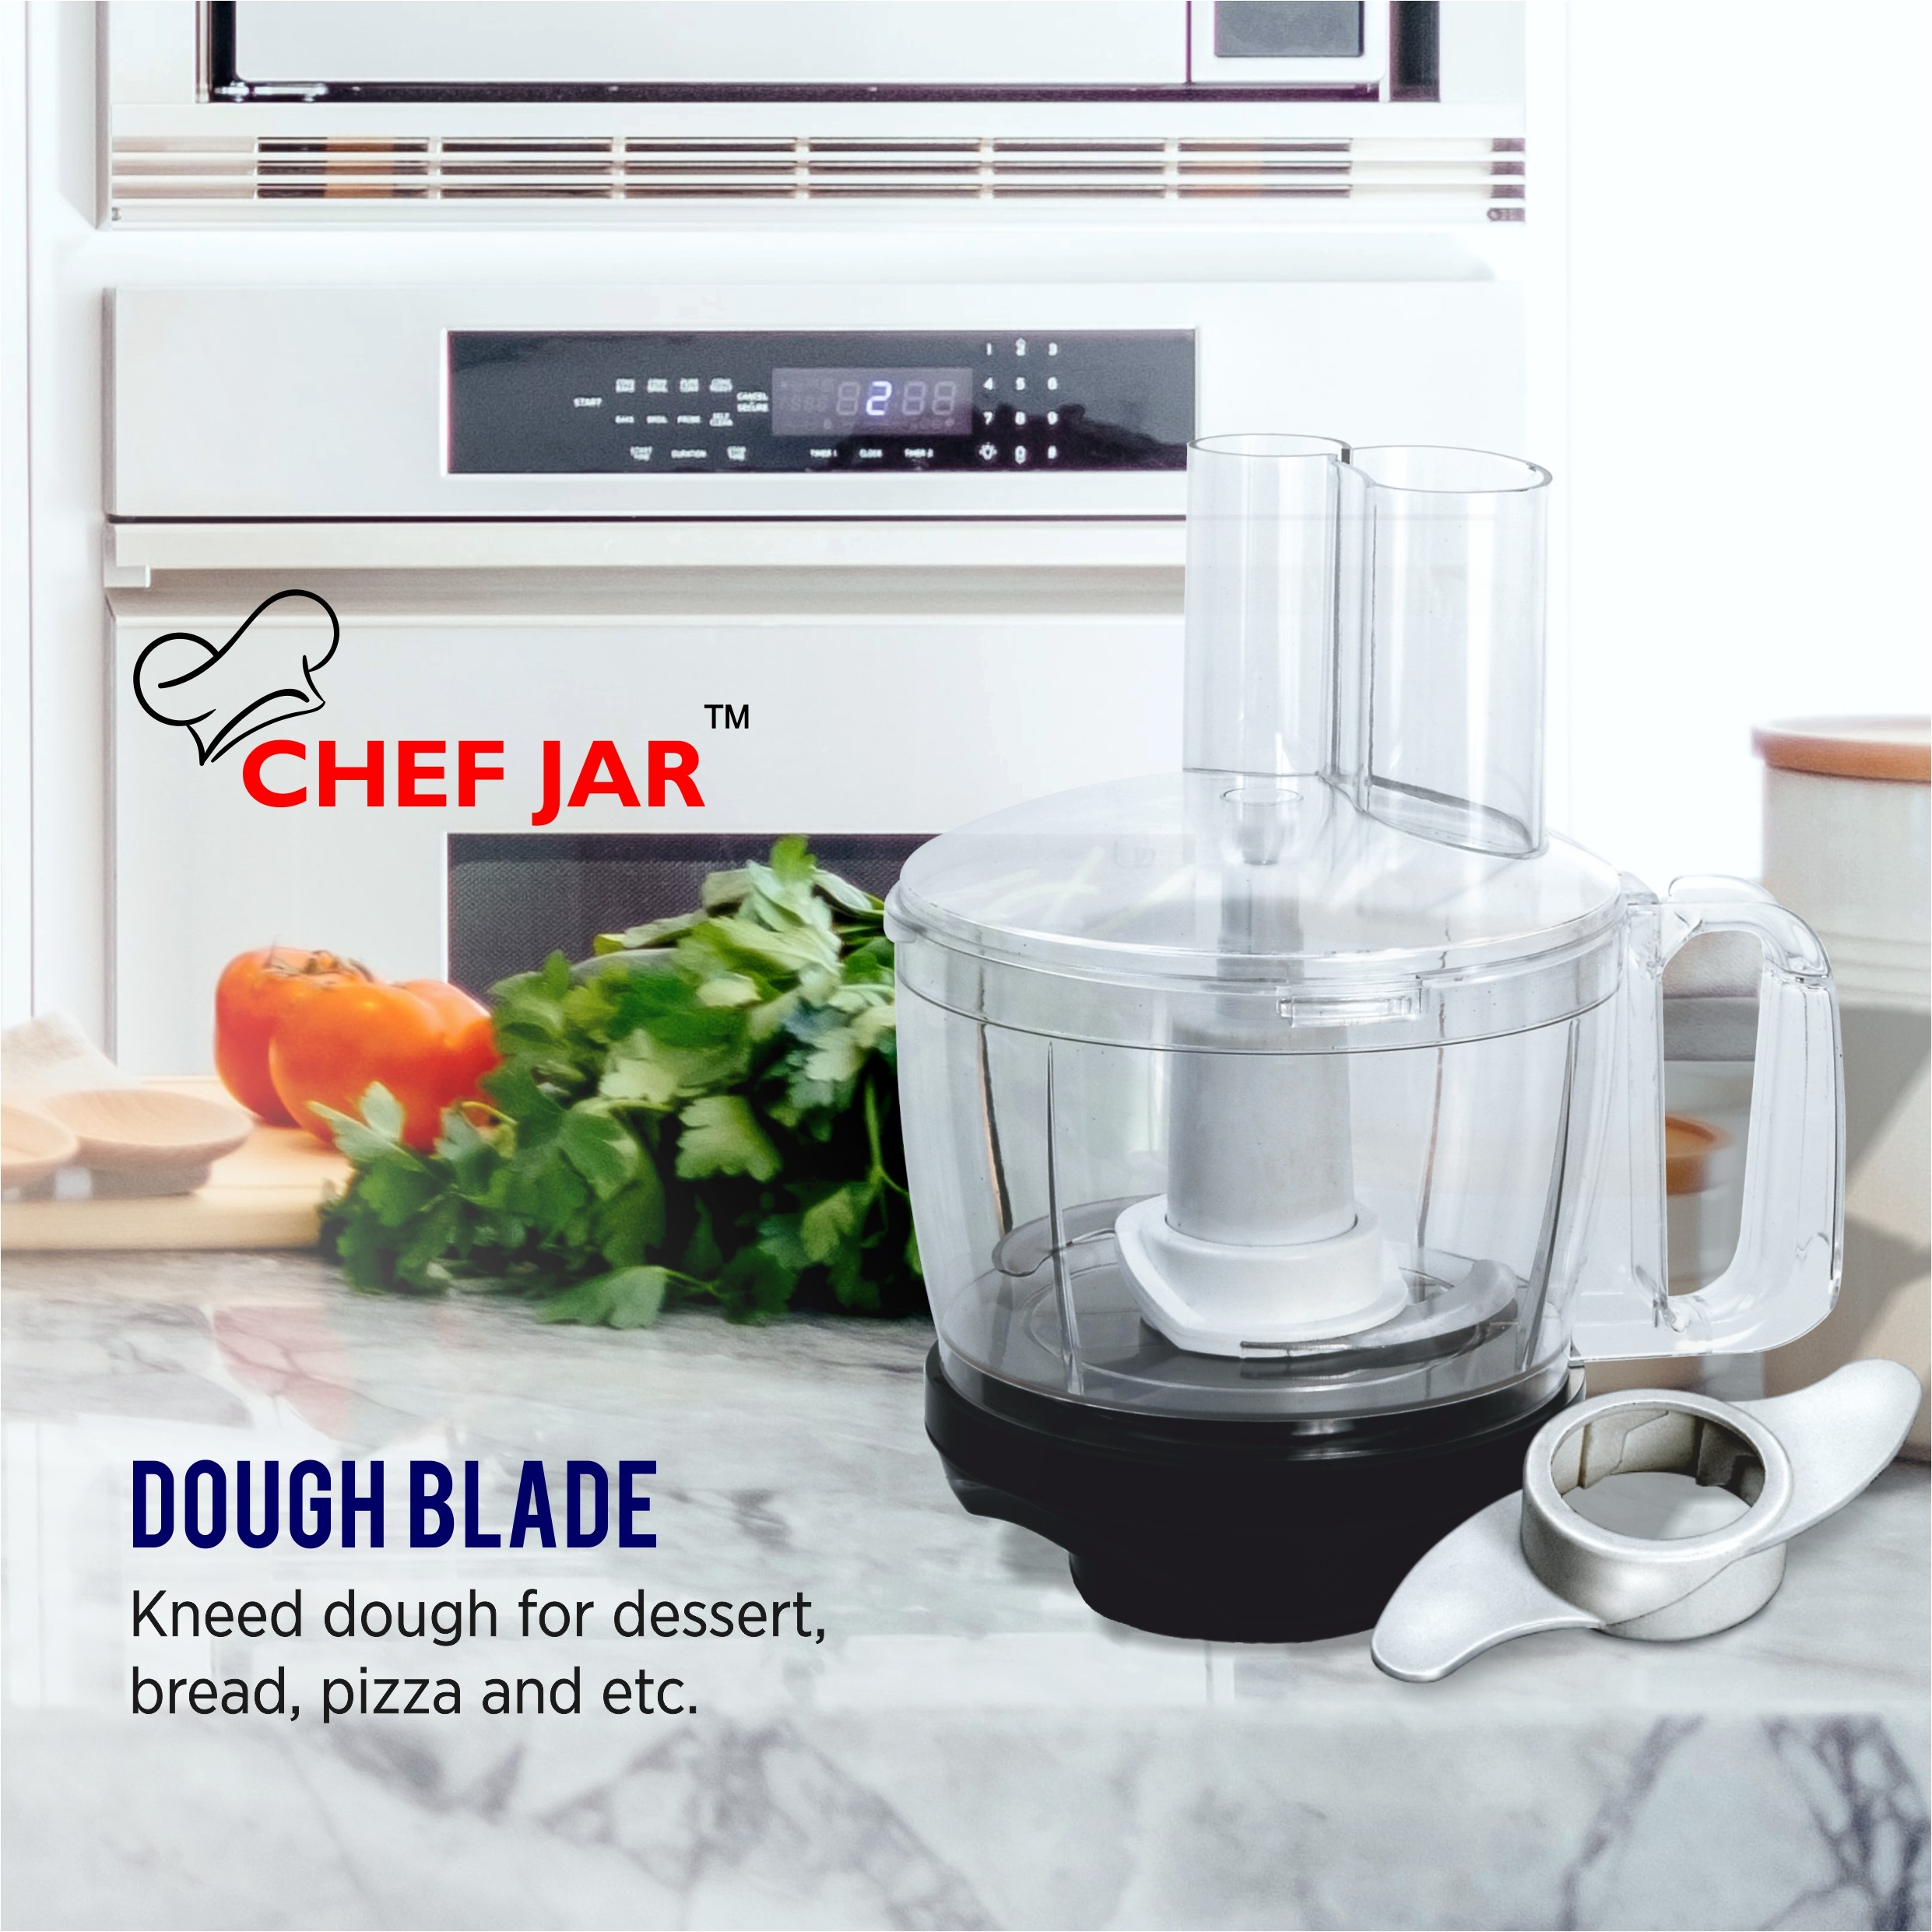 chef-jar-all-in-one-a-complete-food-processor-attachment-for-most-indian-mixer-grinders3